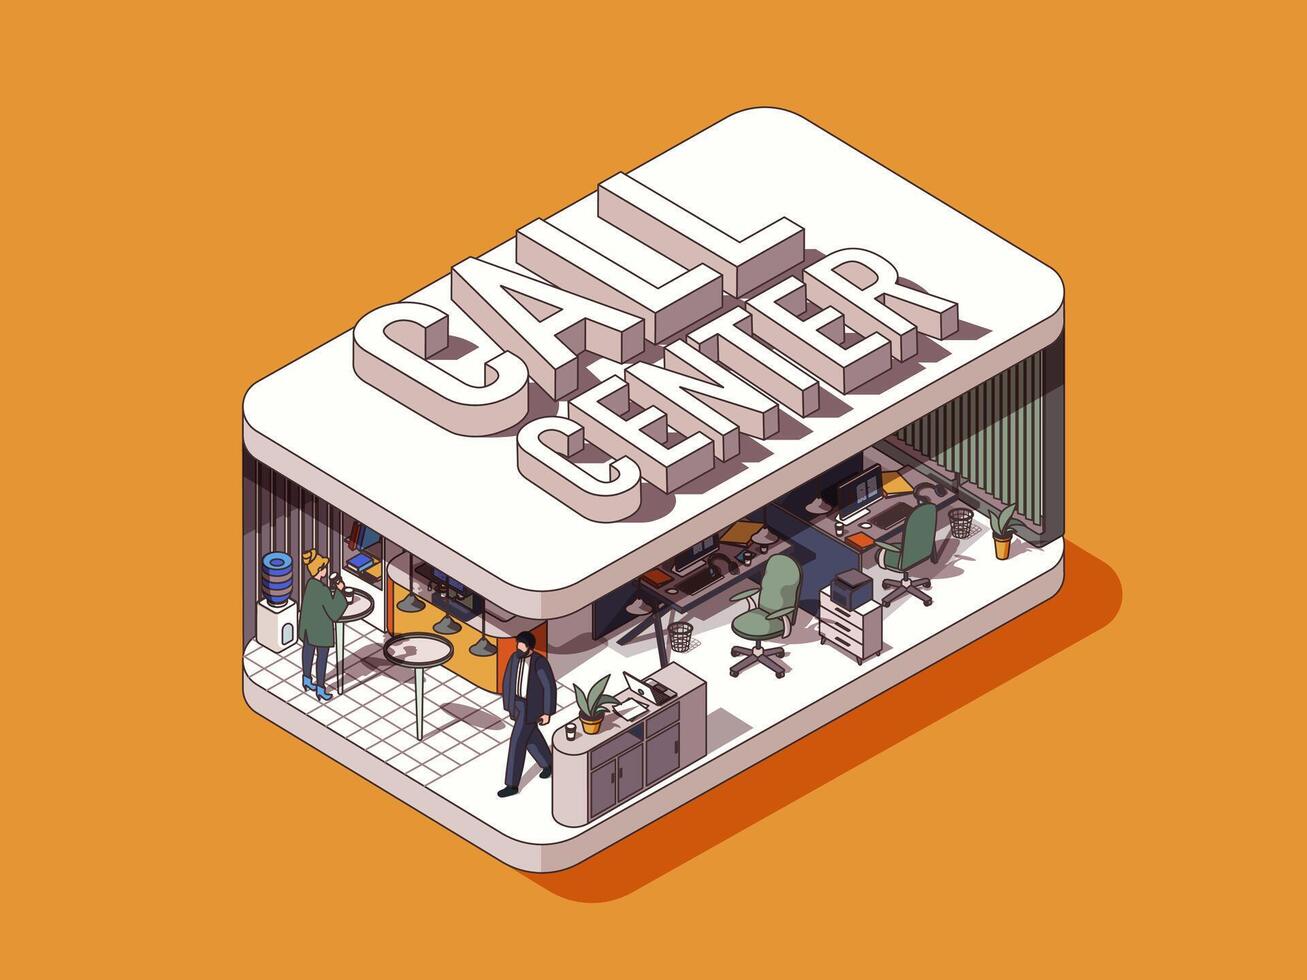 Call center concept in 3d isometric graphic design. Consulting clients and solving problems, technical support work in office. Vector illustration with people in isometric room interior for web banner